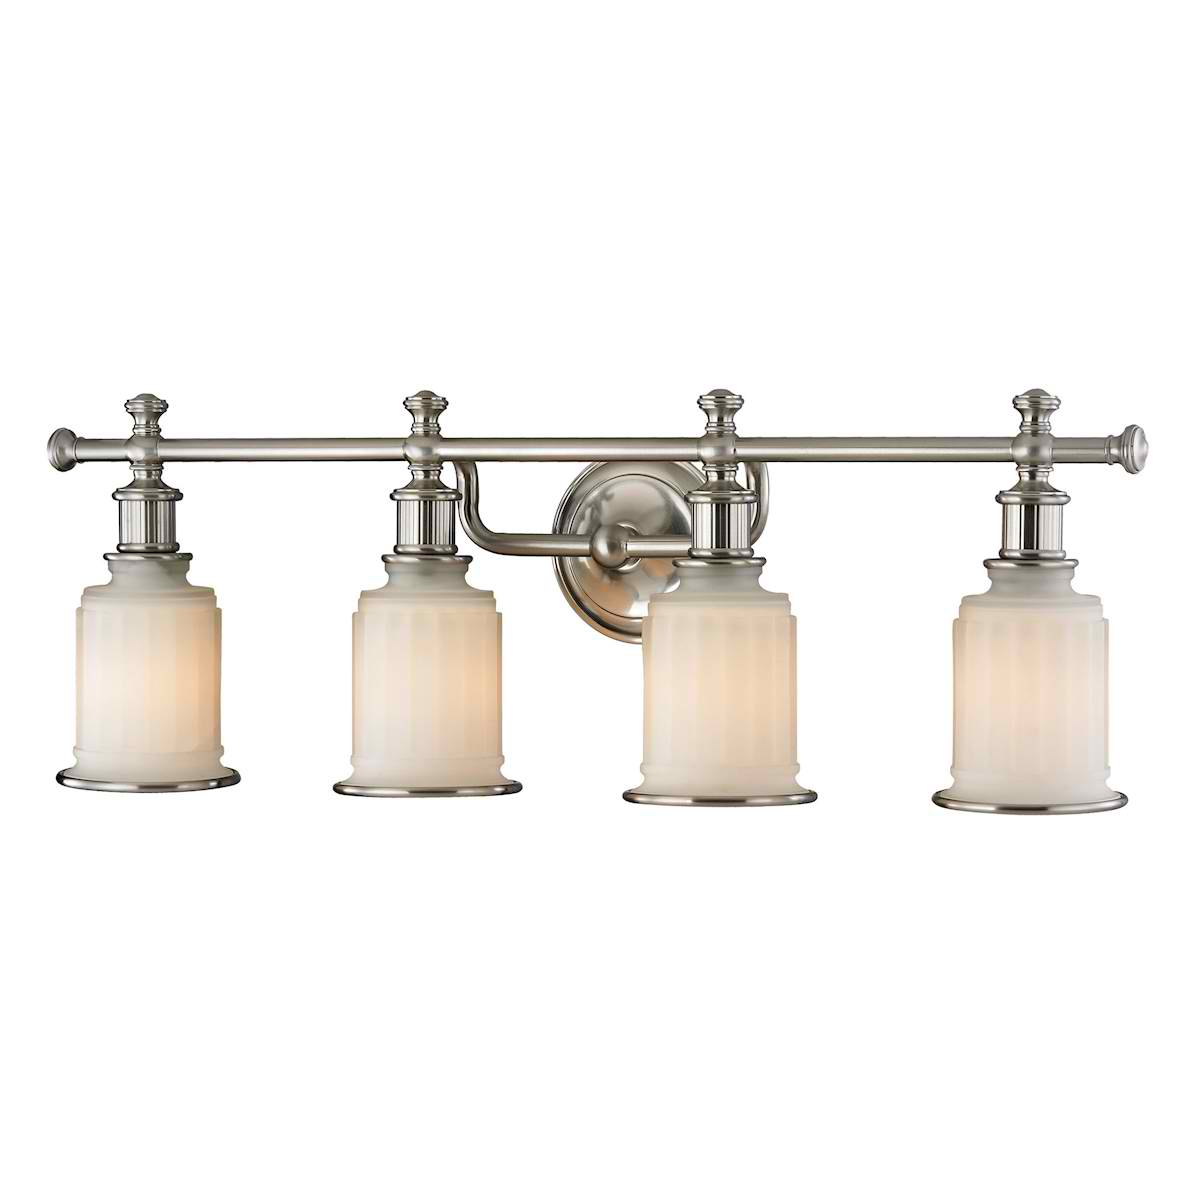 Acadia Collection 4 Light Bath in Brushed Nickel